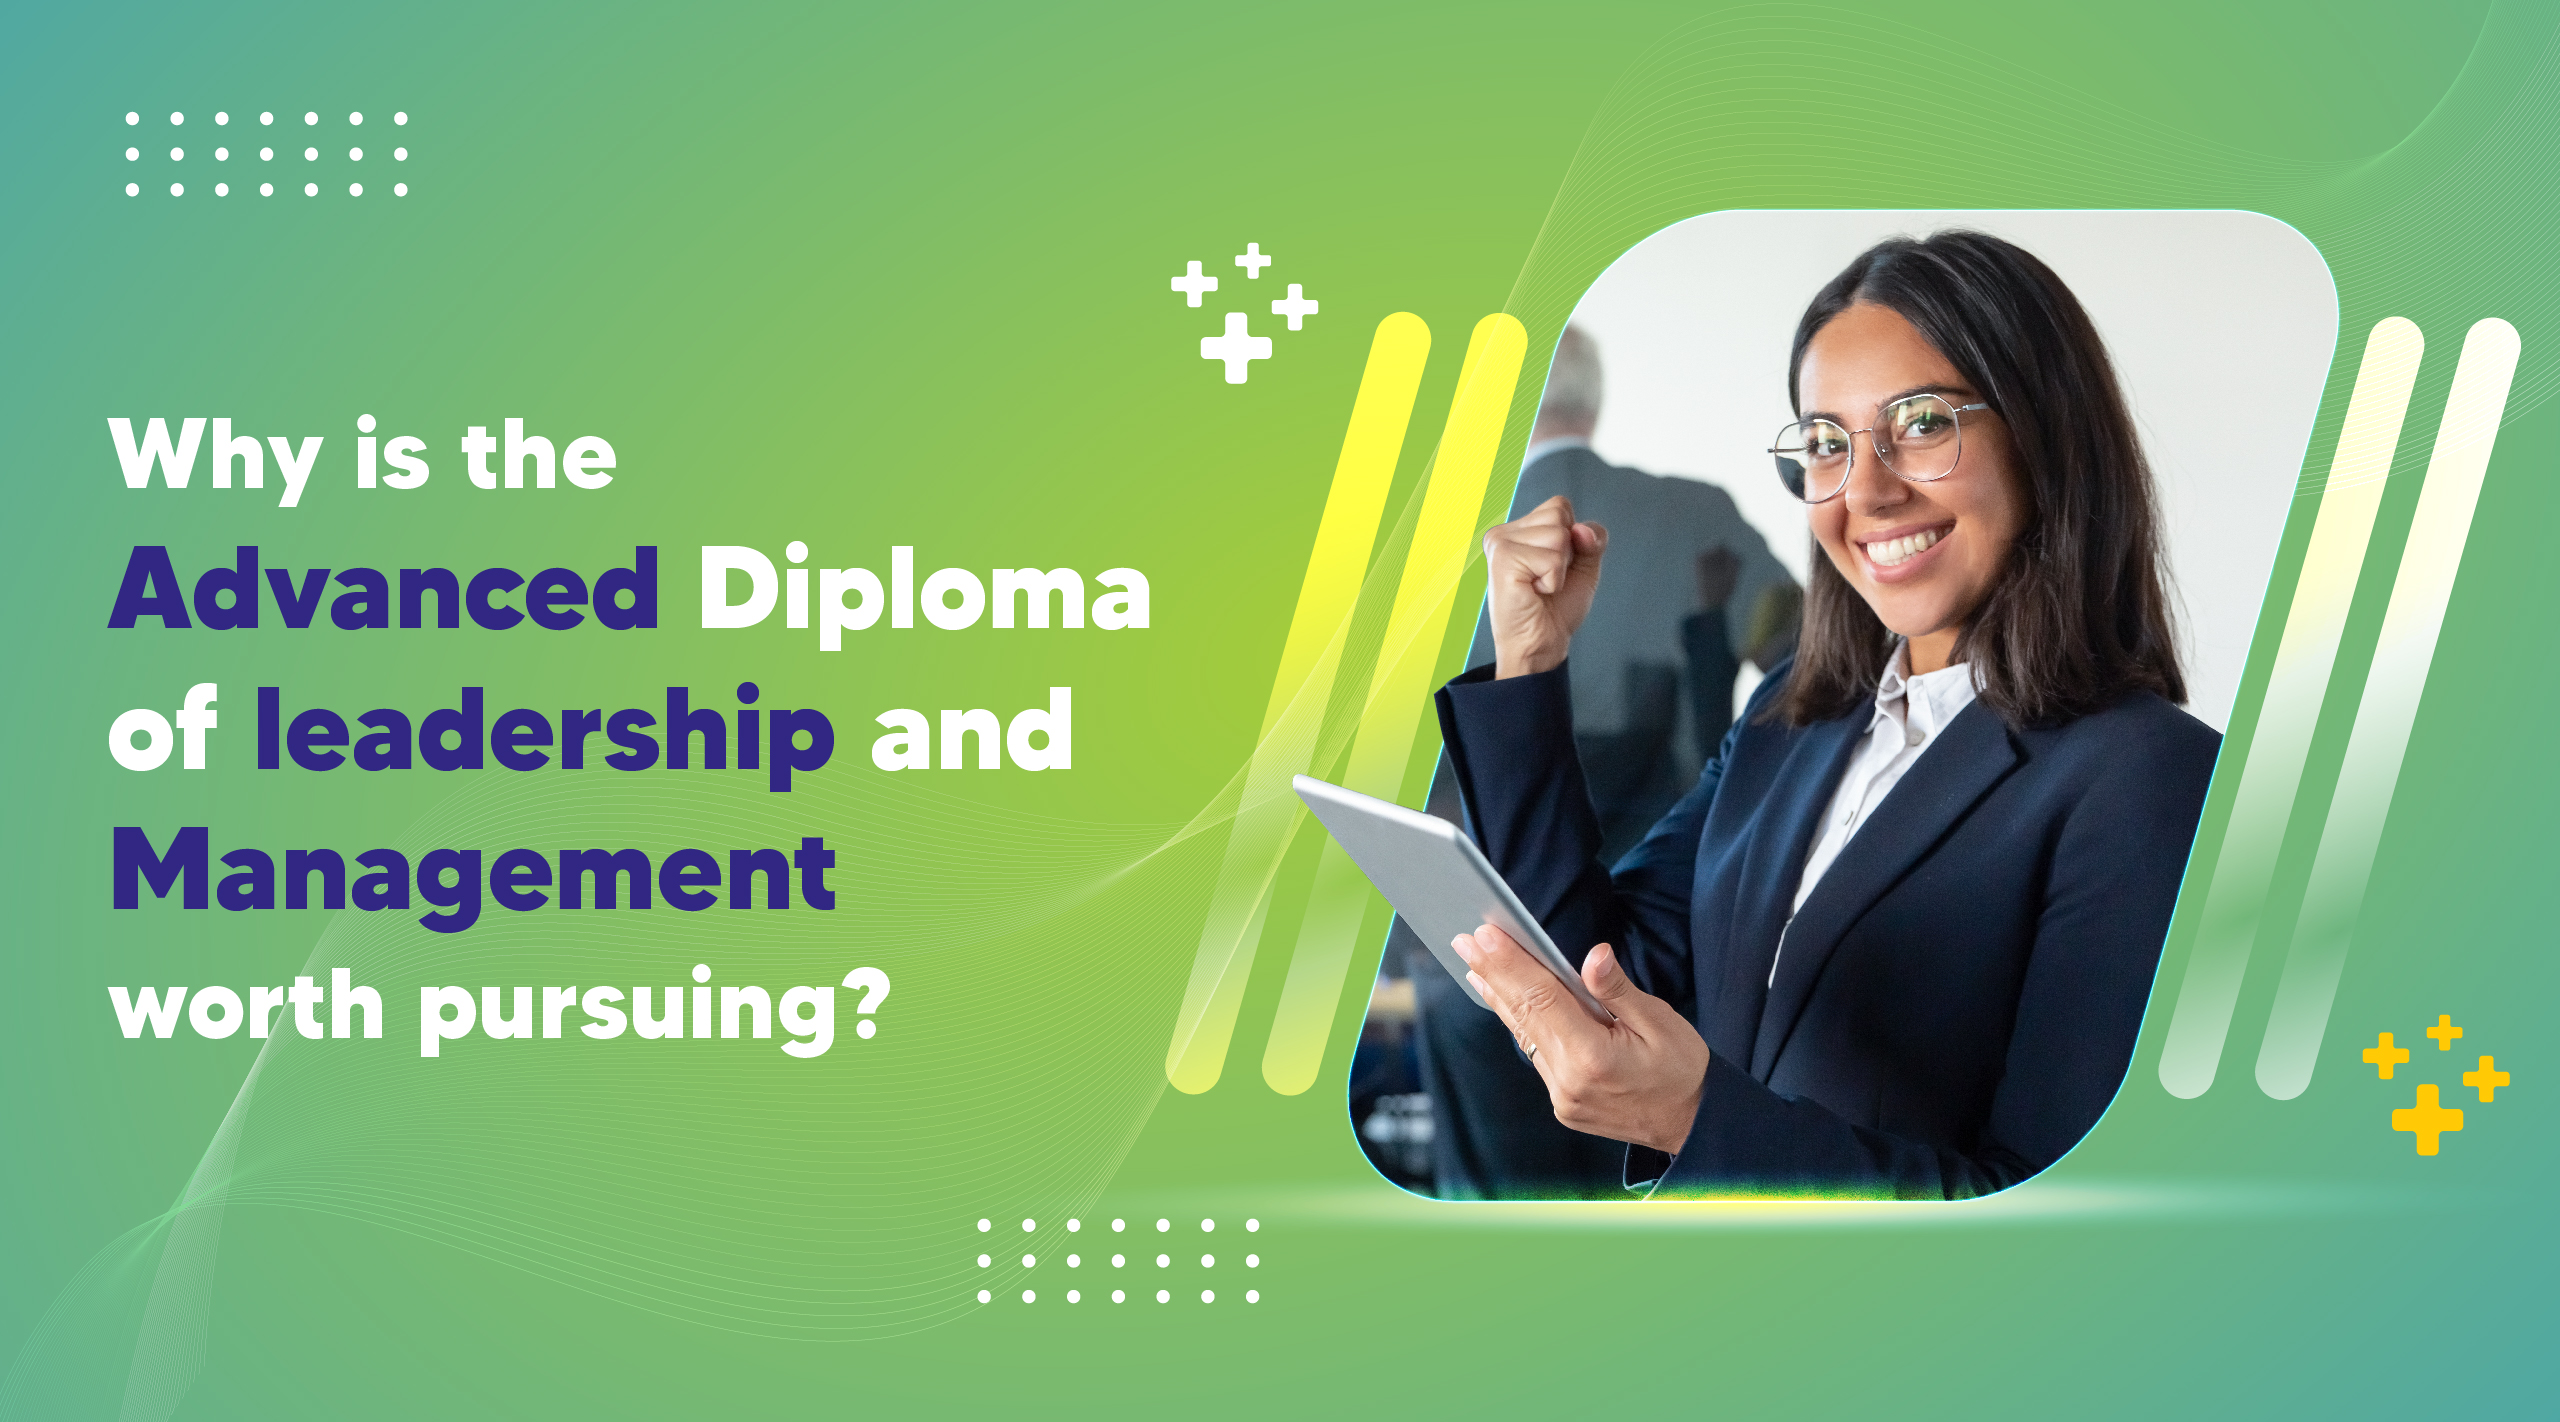 Why is the Advanced Diploma of Leadership and Management worth pursuing?